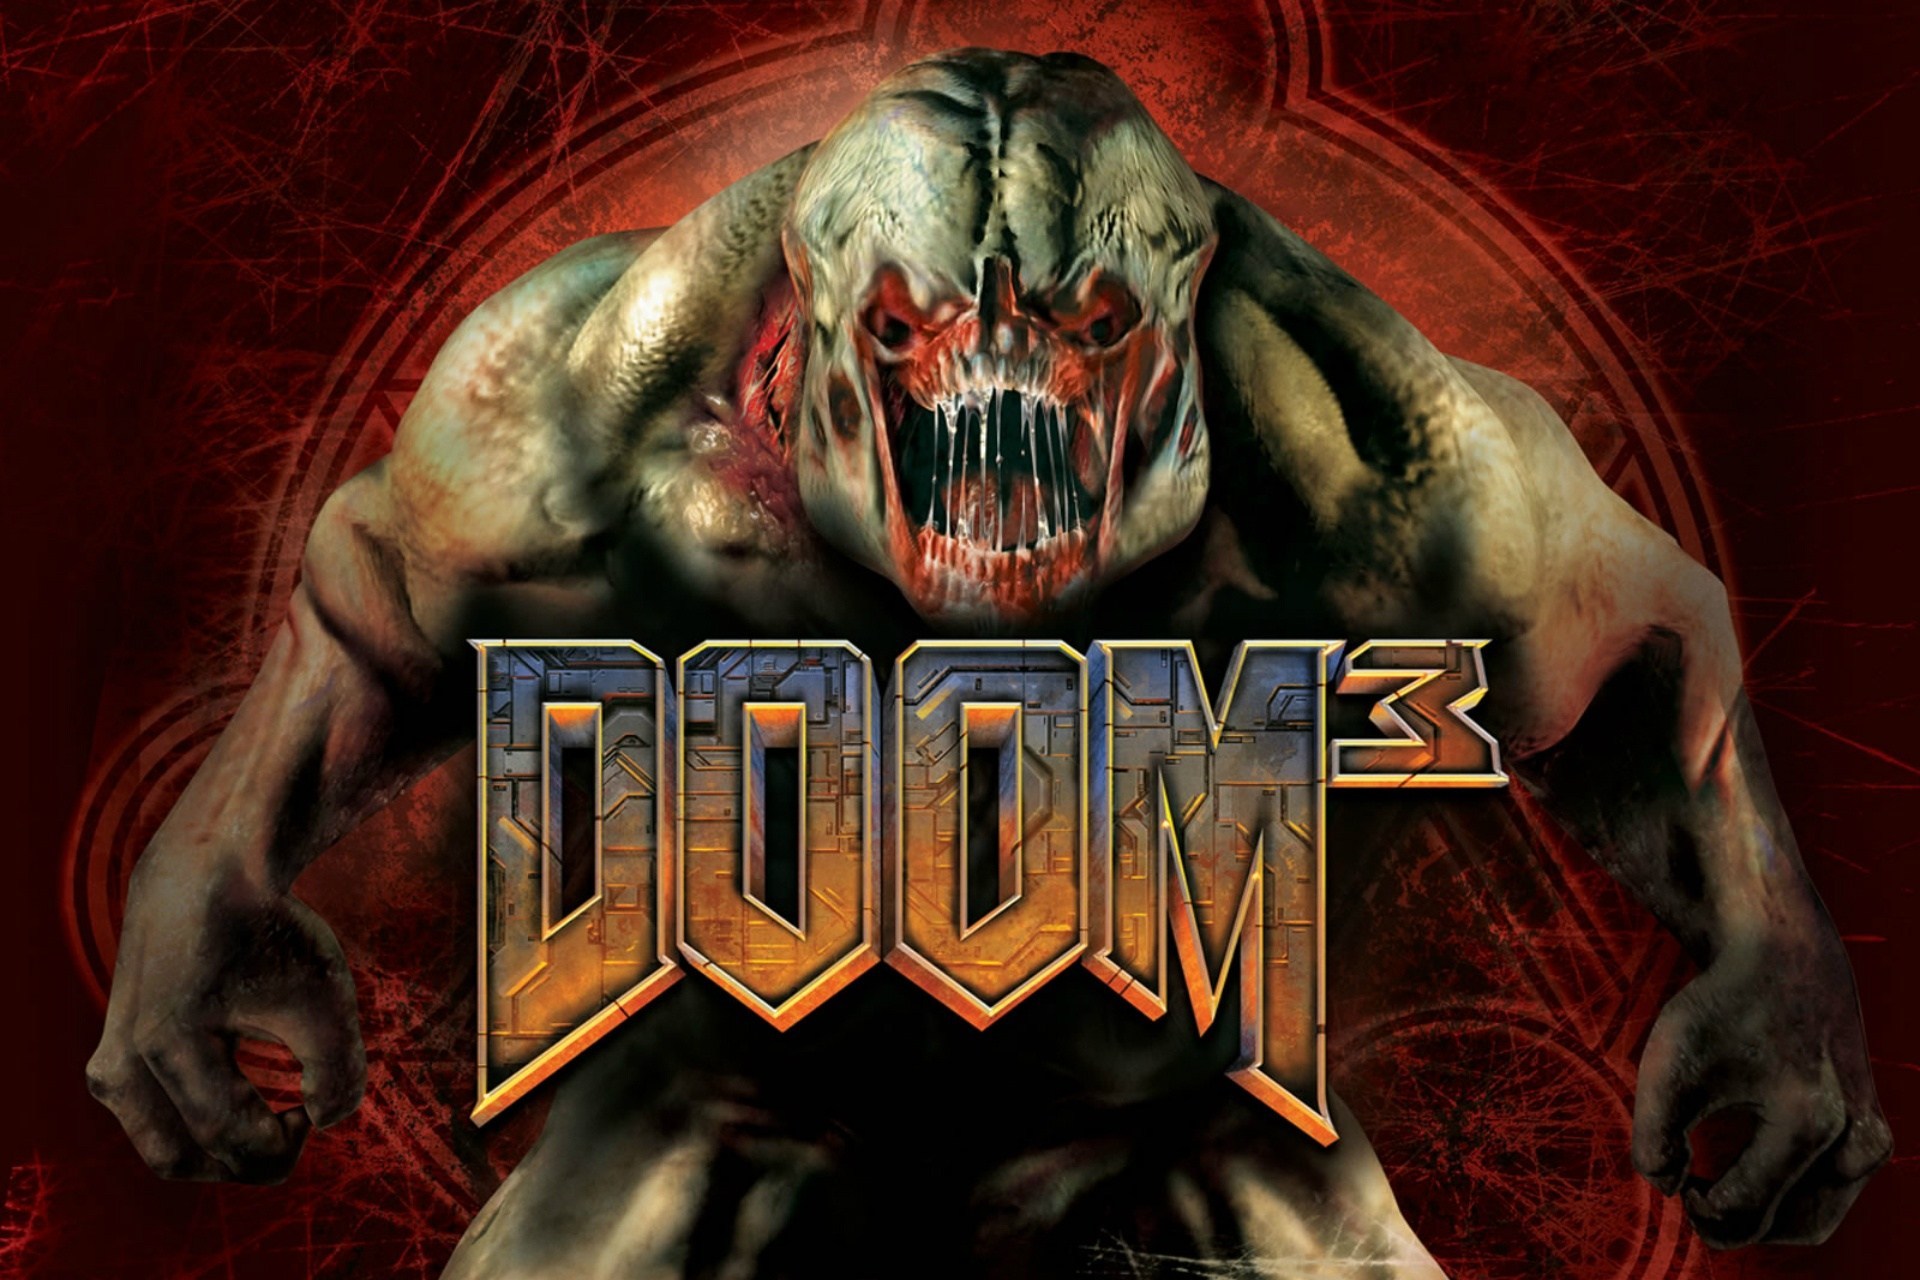 Doom 3 Mods 2019 Weapons Lights Blood Extended Moddb